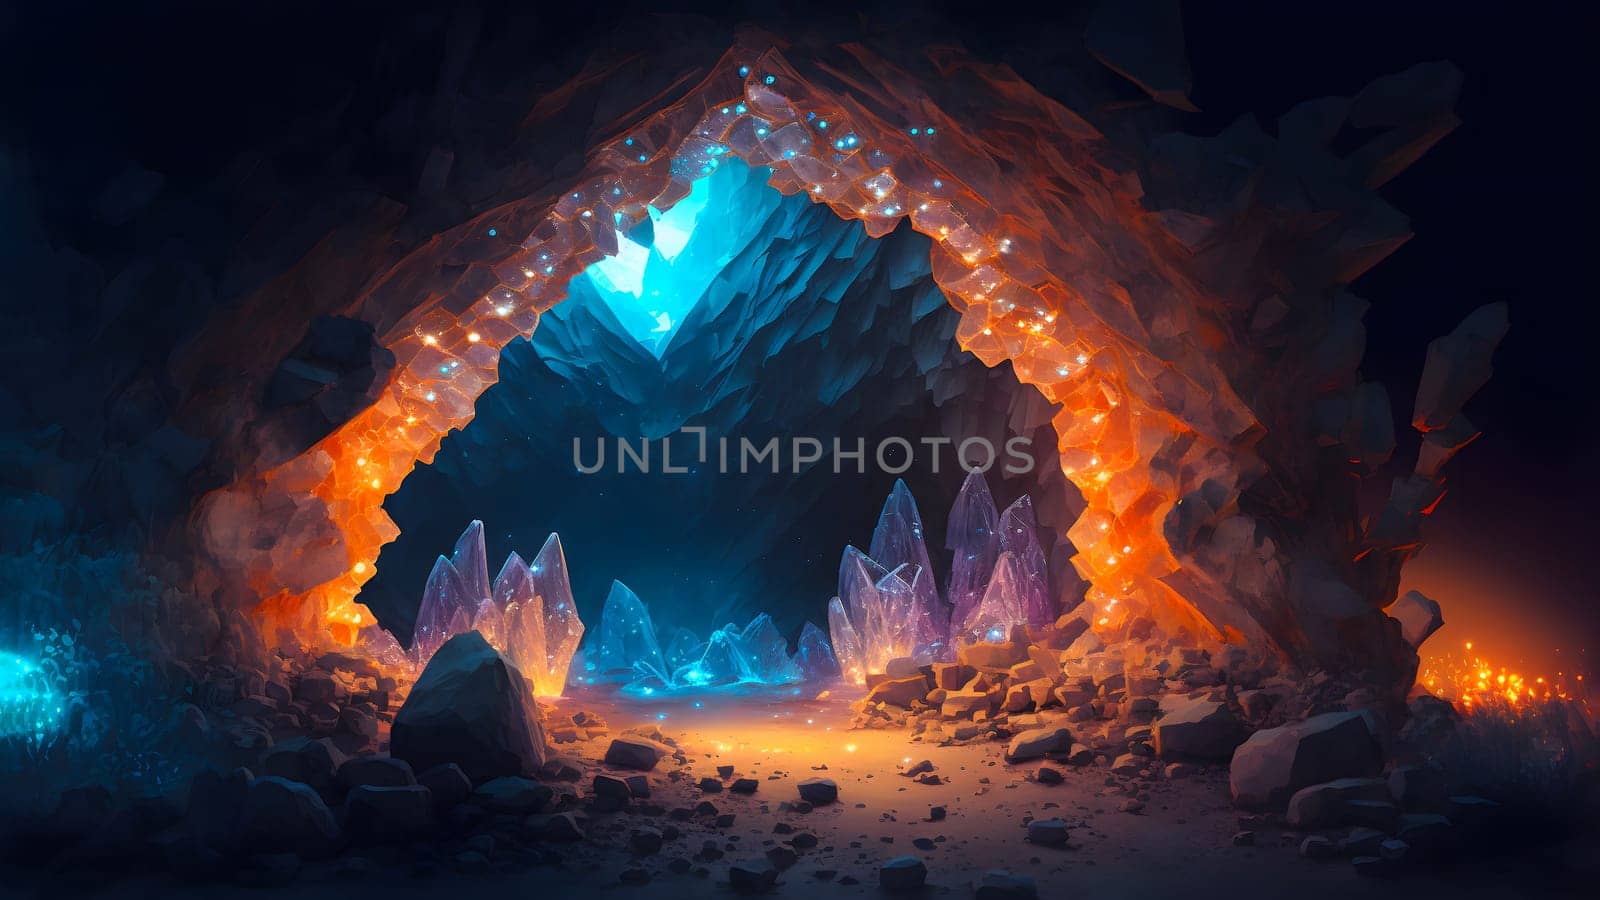 glowing crystal cave tunnel, neural network generated art. Digitally generated image. Not based on any actual person, scene or pattern.